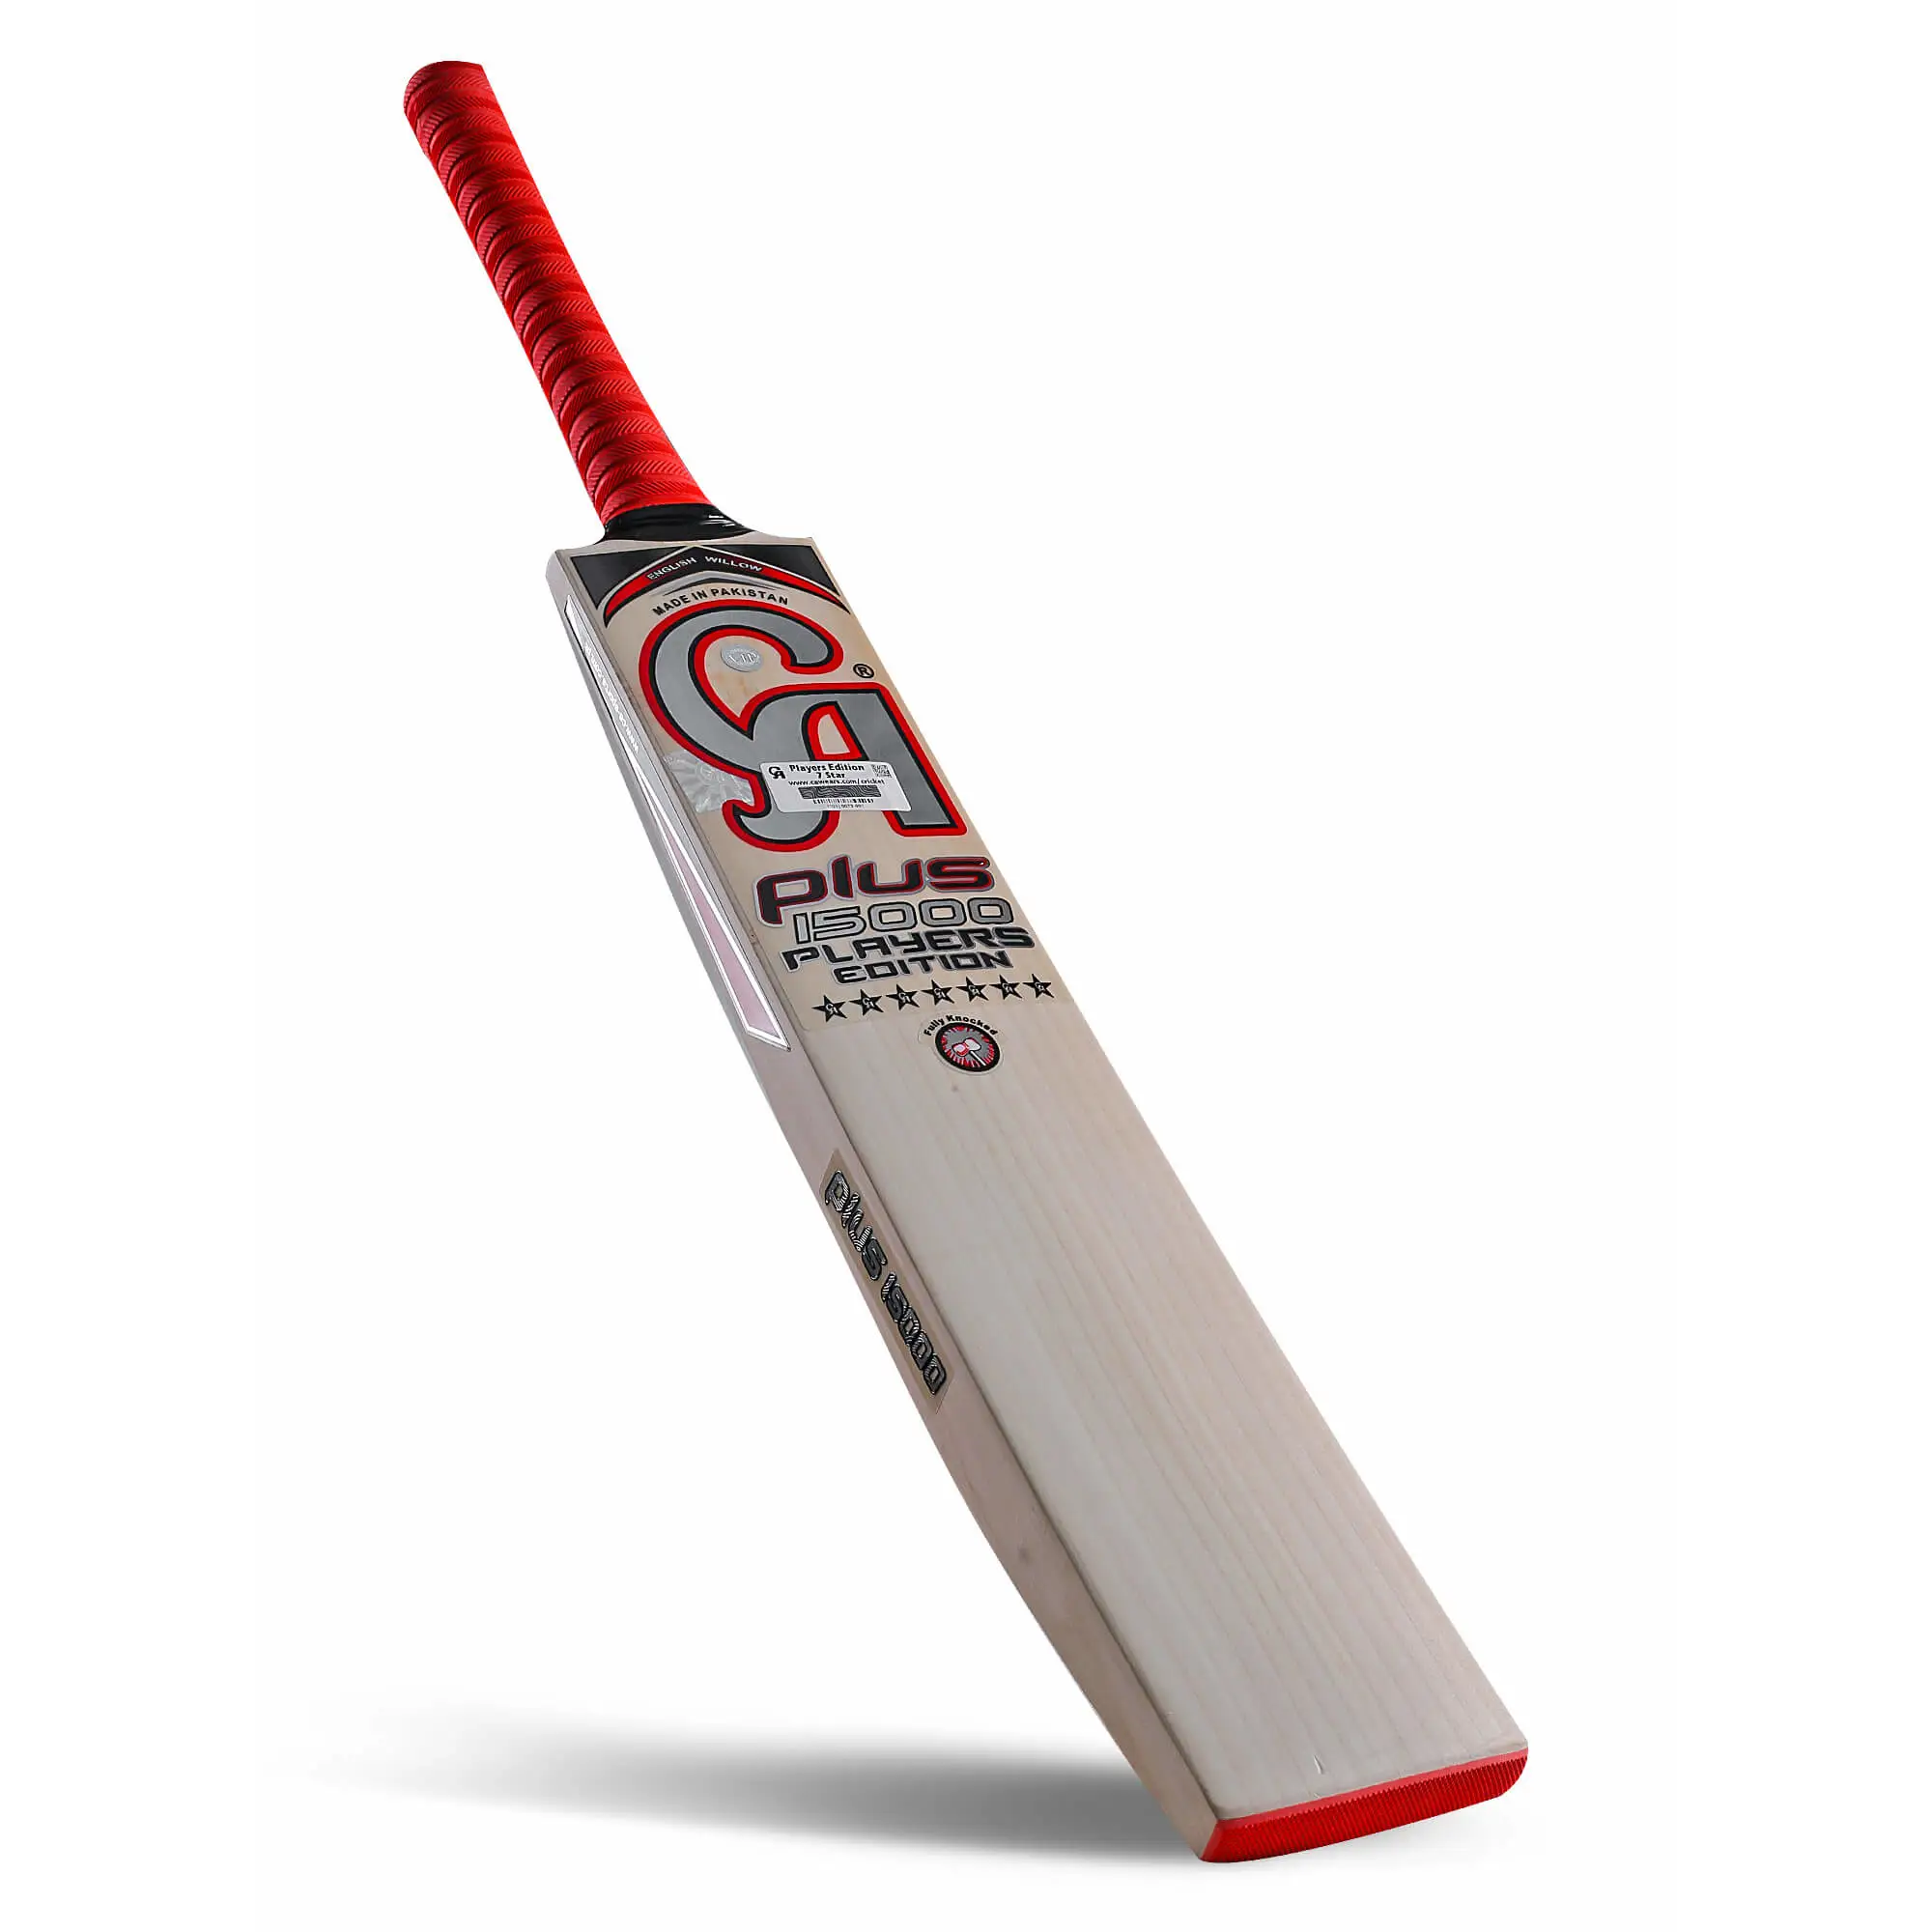 CA Plus 15000 Players Edition 7 Cricket Bat English Willow Used By International Players - Short Handle - BATS - MENS ENGLISH WILLOW